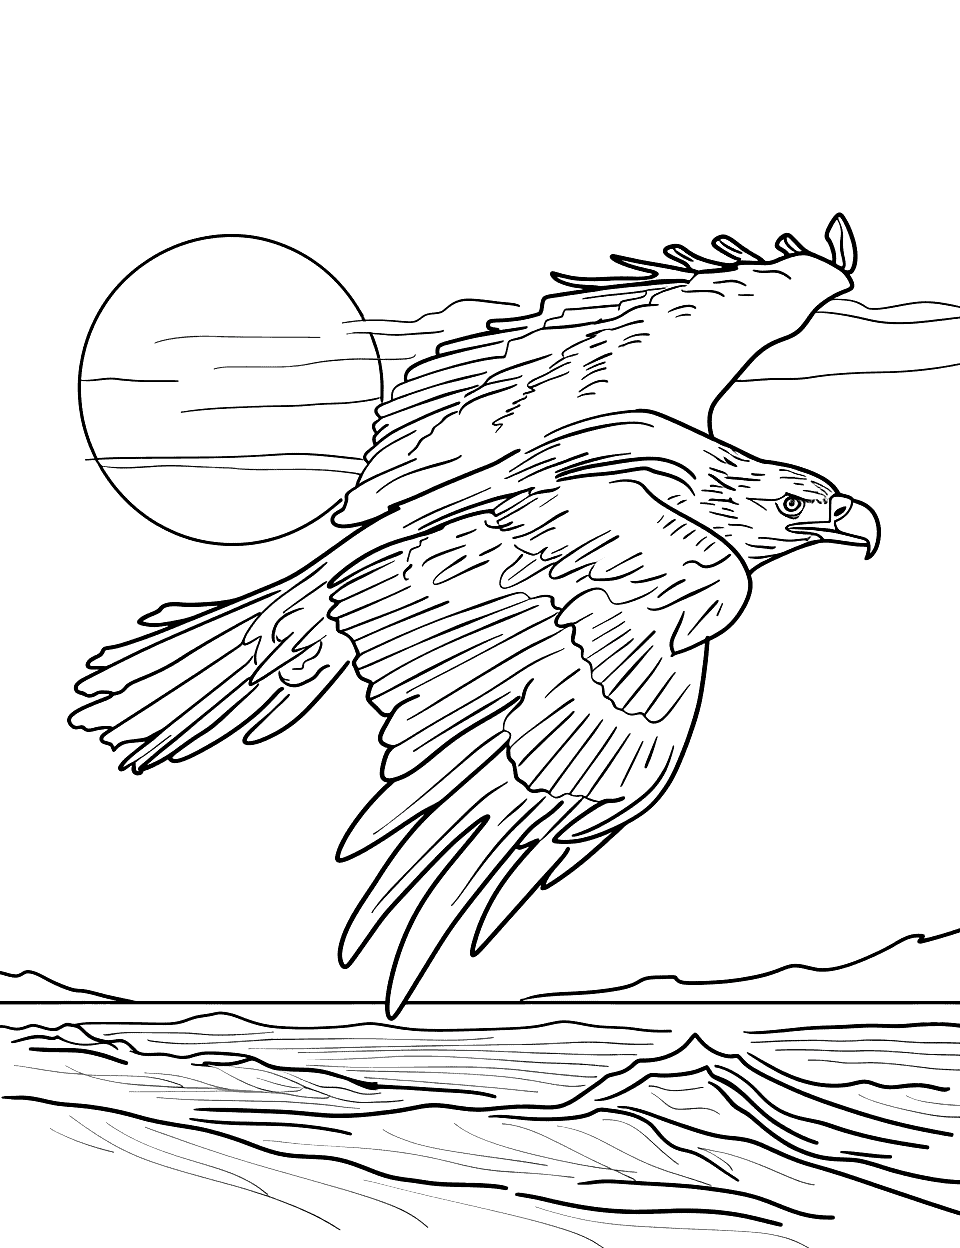 Graceful Sea Eagle Over the Ocean Coloring Page - A sea eagle flies low over the waves of a calm ocean, with the sun setting in the background.